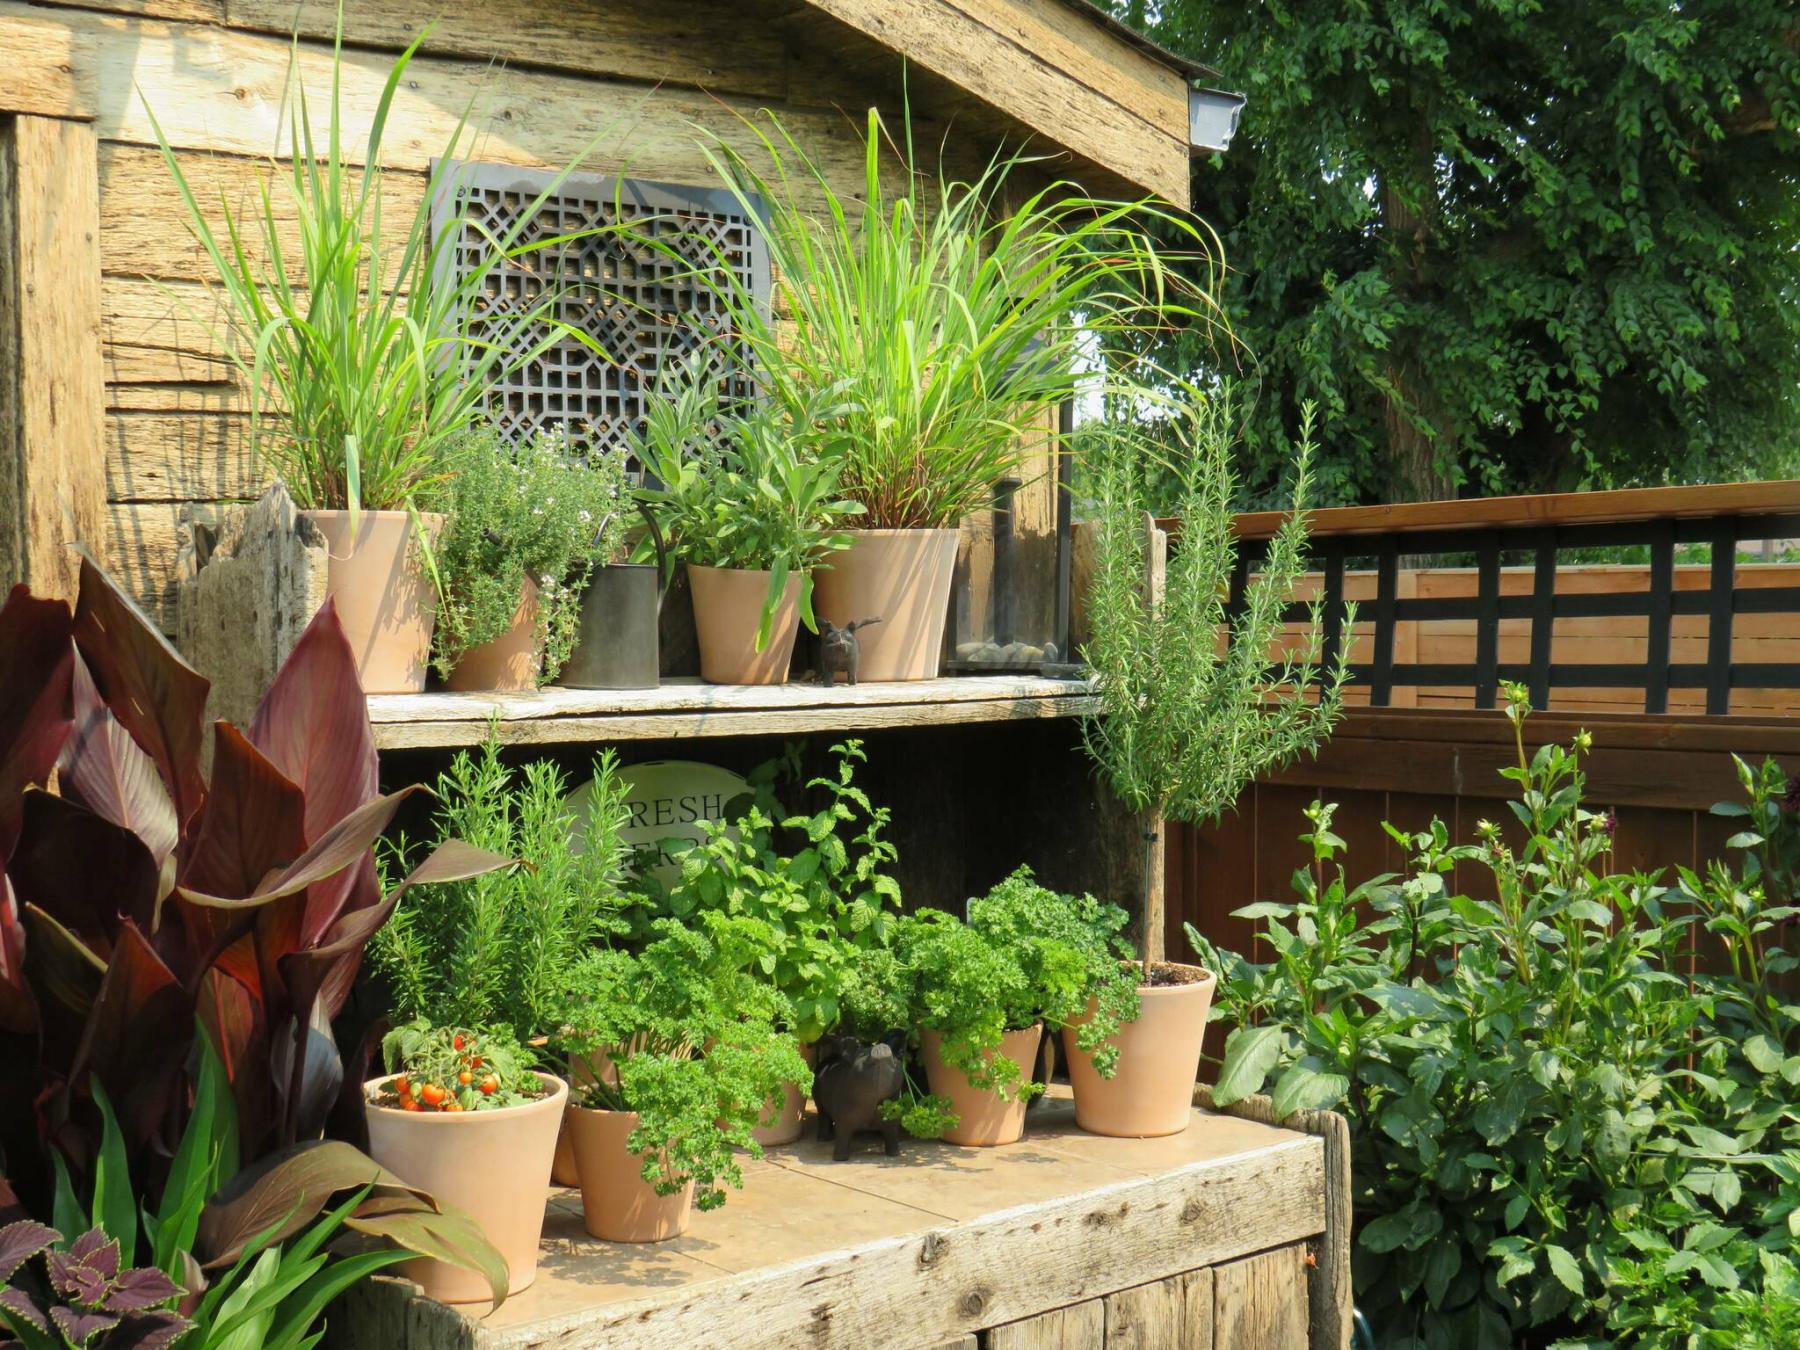  <p>Colleen Zacharias / Winnipeg Free Press</p>
                                <p>Terra cotta containers planted with an array of herbs give an old-world feel to this potting bench built from weathered cedar.</p> 